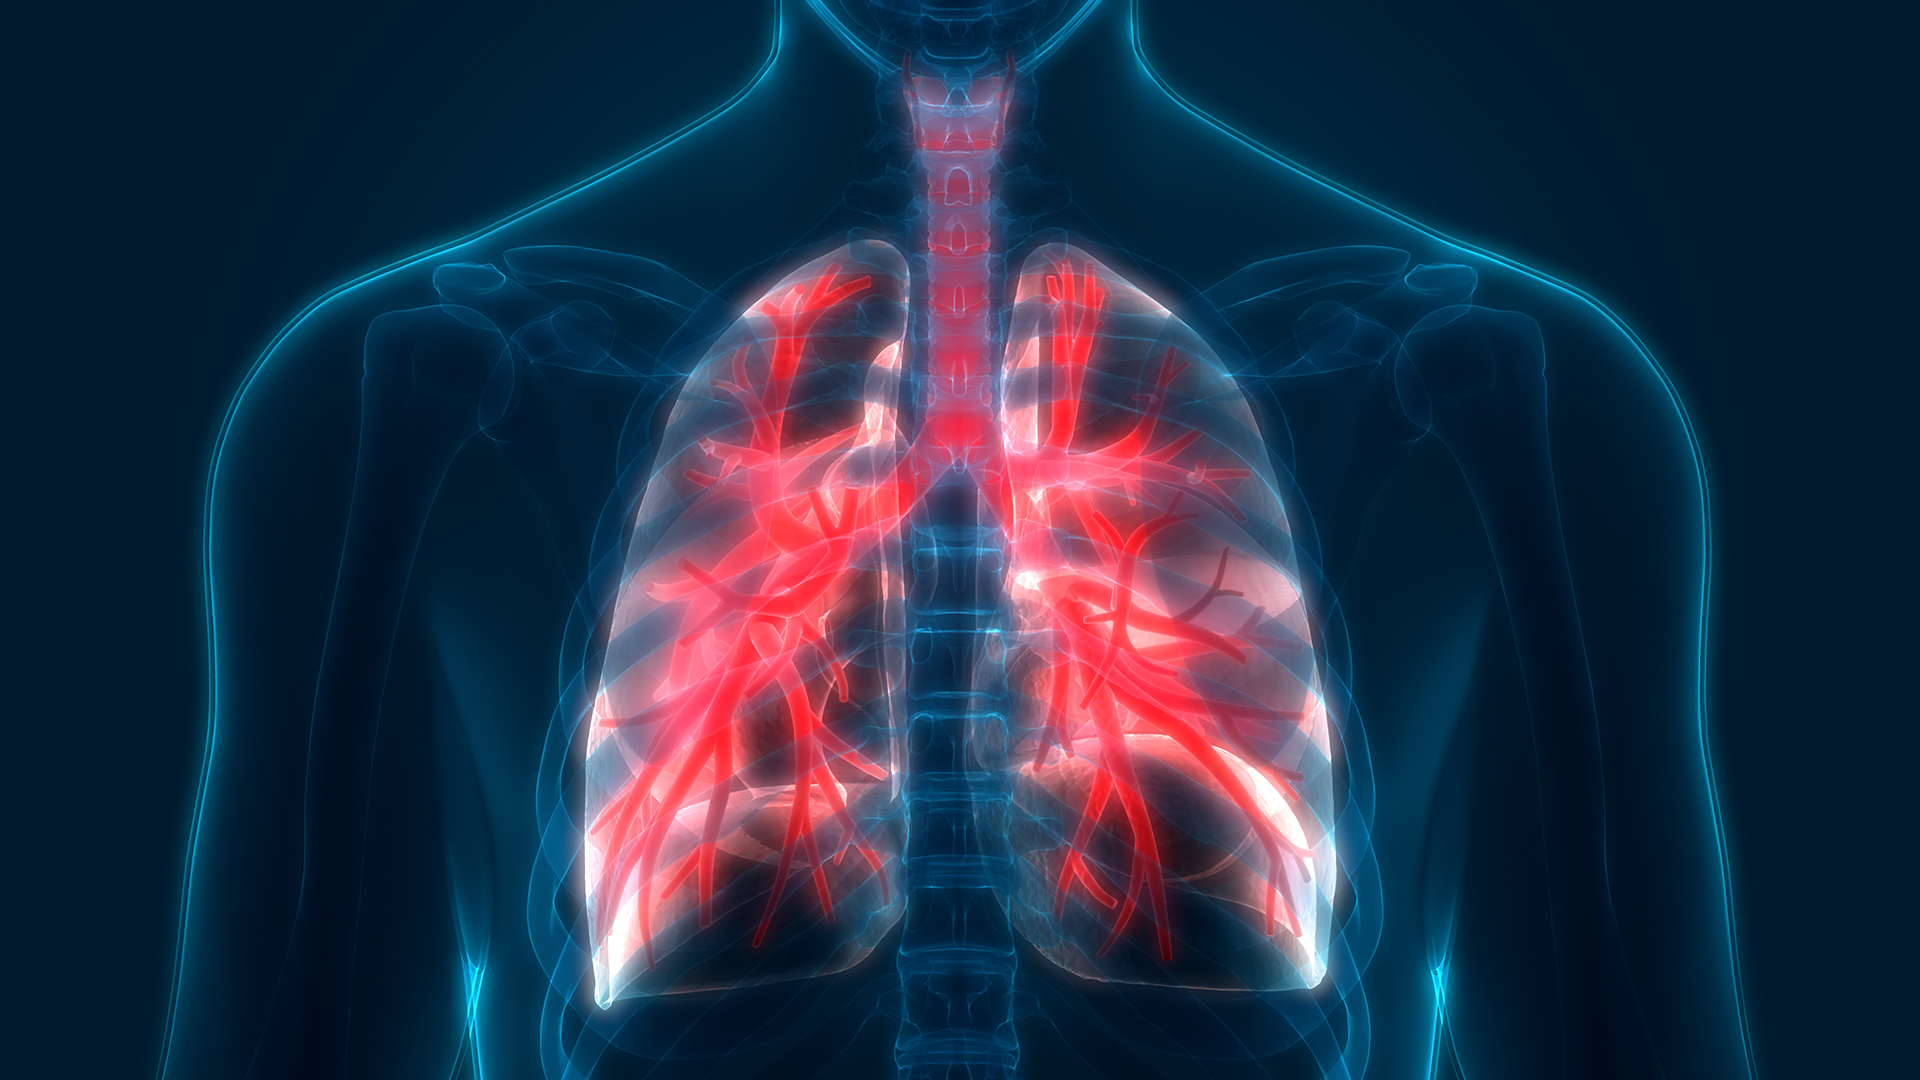 Computerized tissue-imaging may help predict early recurrence of lung